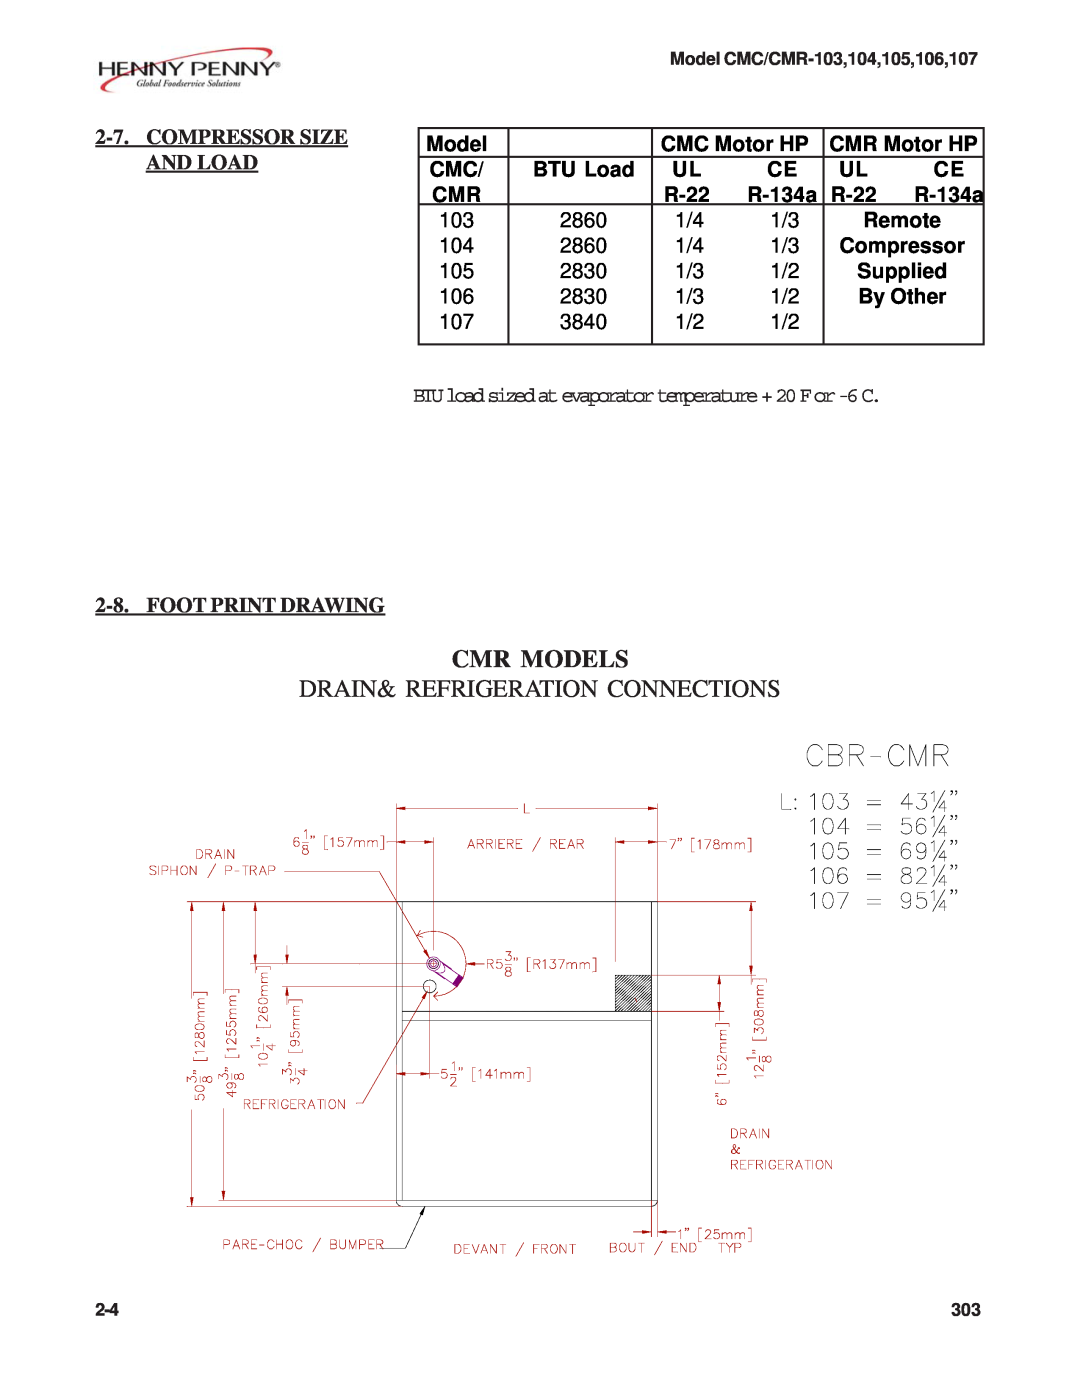 Henny Penny CMC/CMR-107 manual Cmr Models, Compressor Size, And Load, Foot Print Drawing, Drain& Refrigeration Connections 